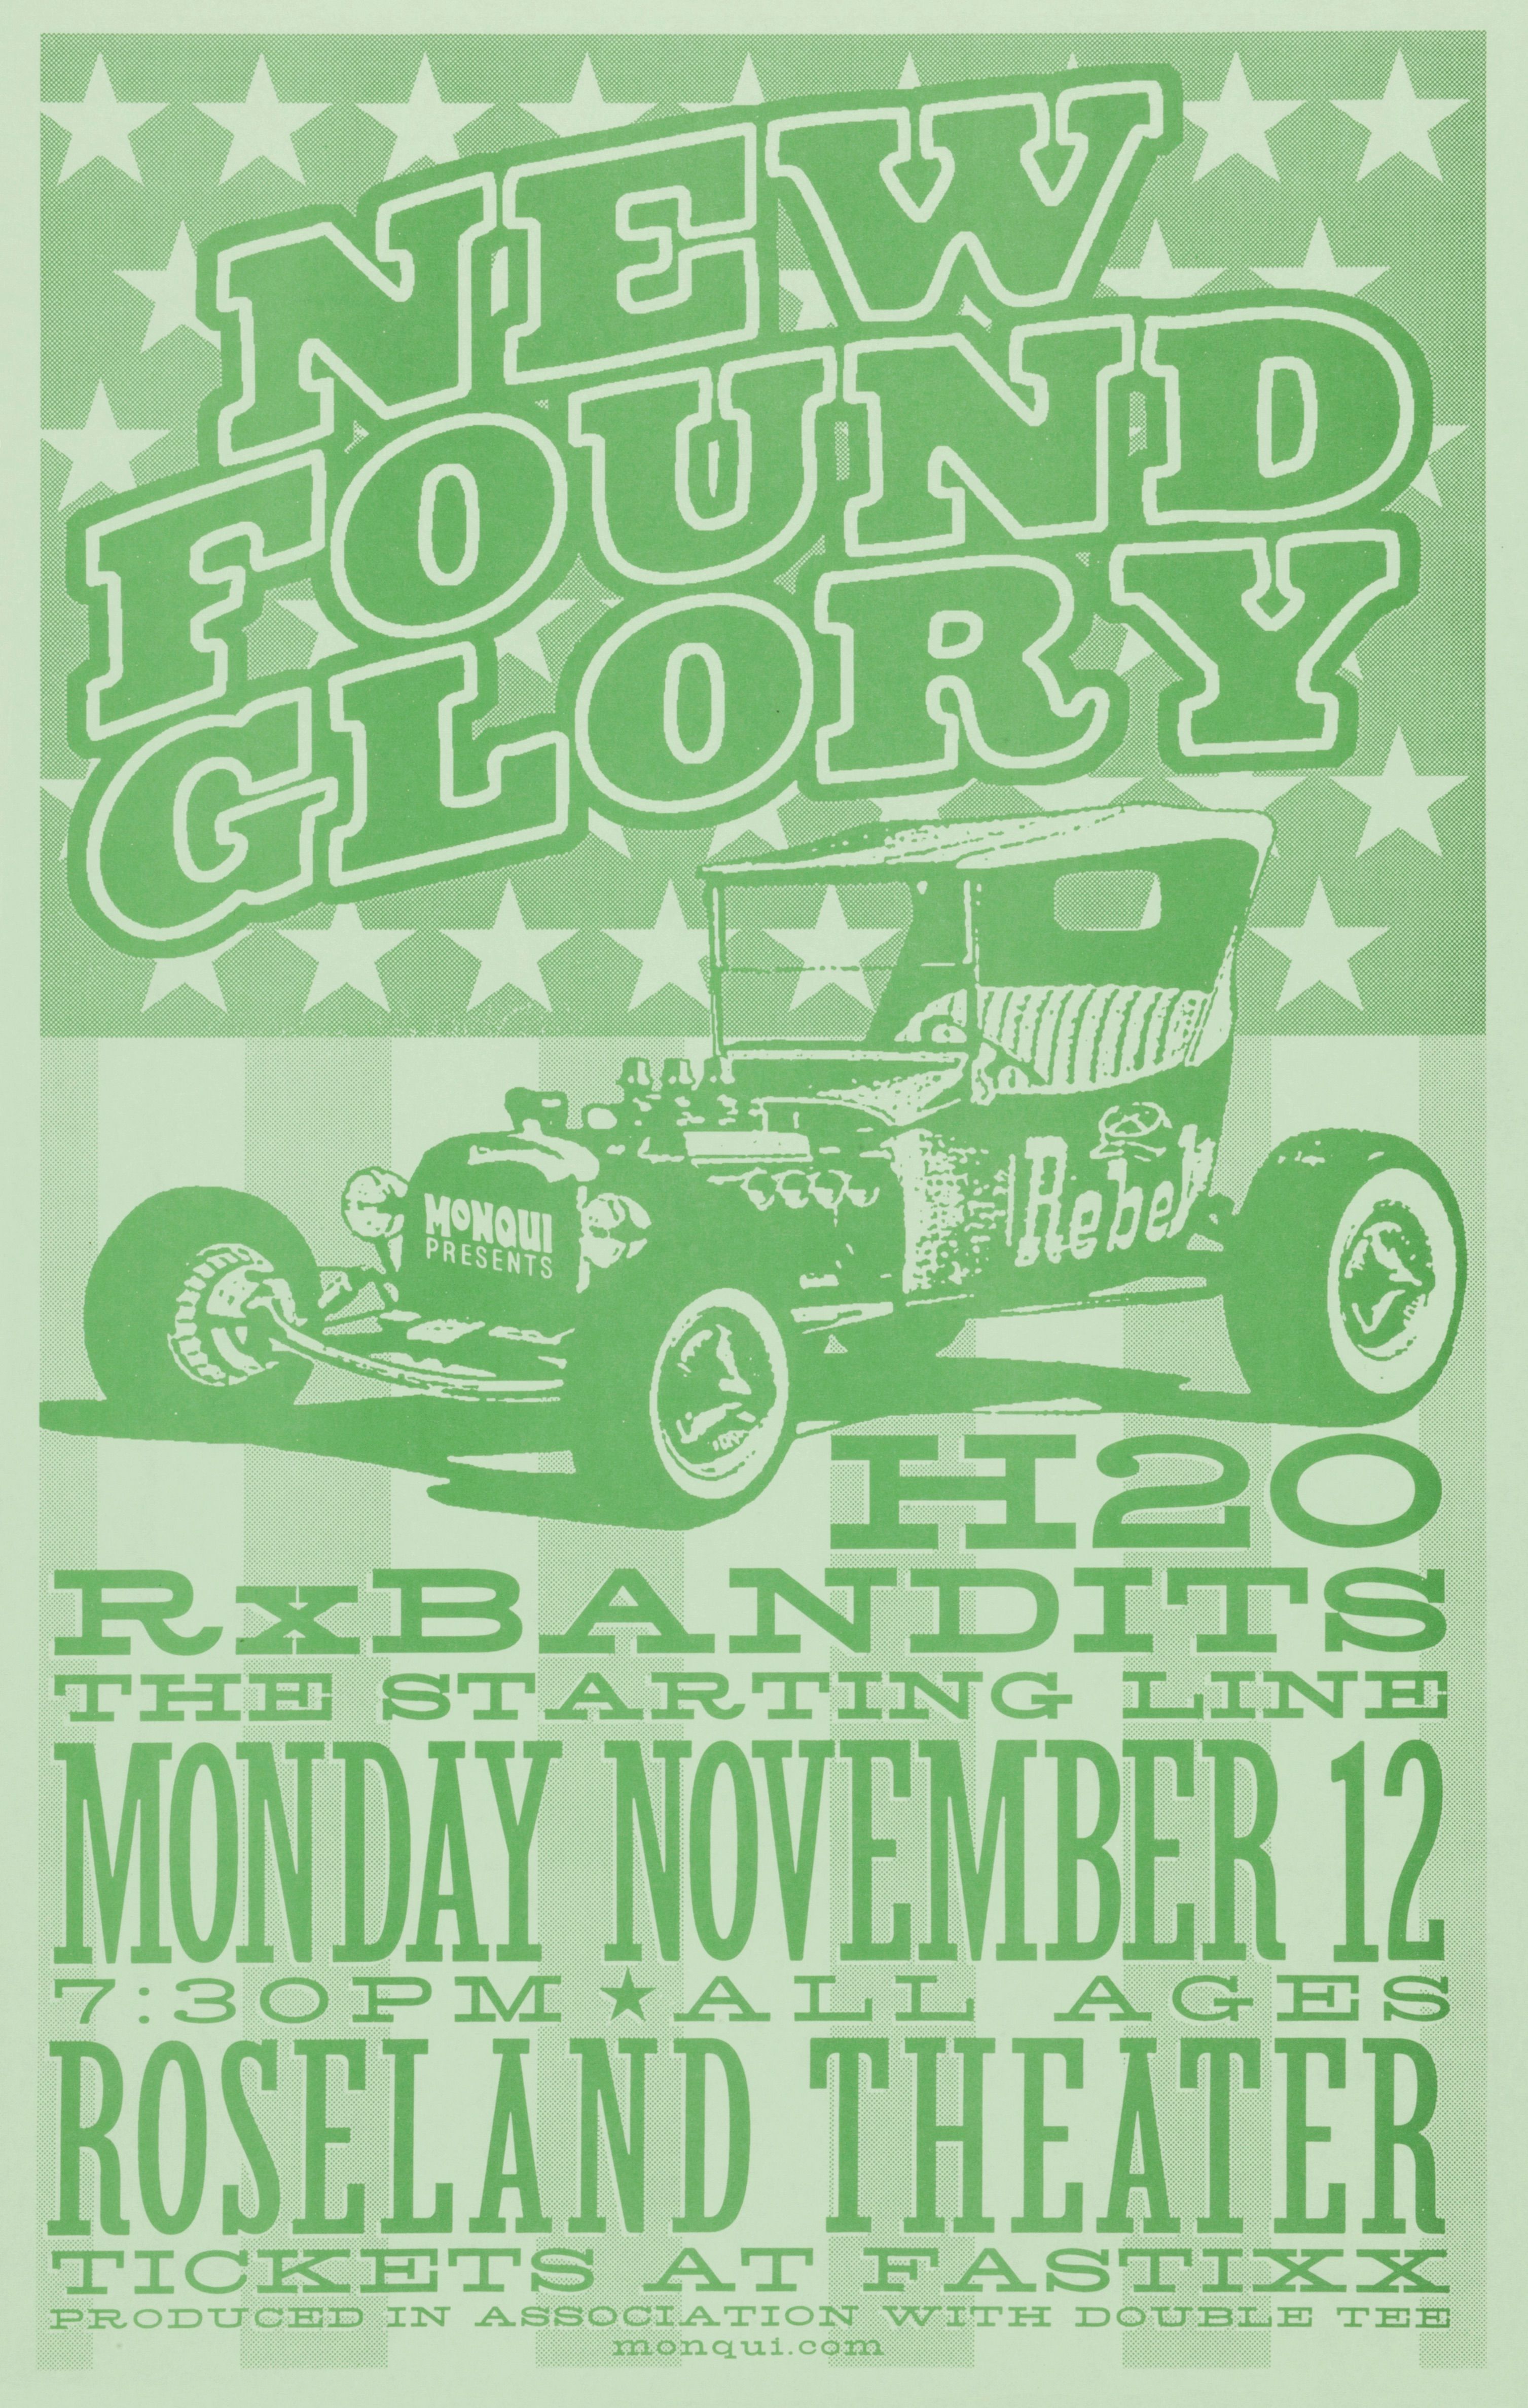 MXP-17.6 New Found Glory 2001 Roseland Theater  Nov 12 Concert Poster